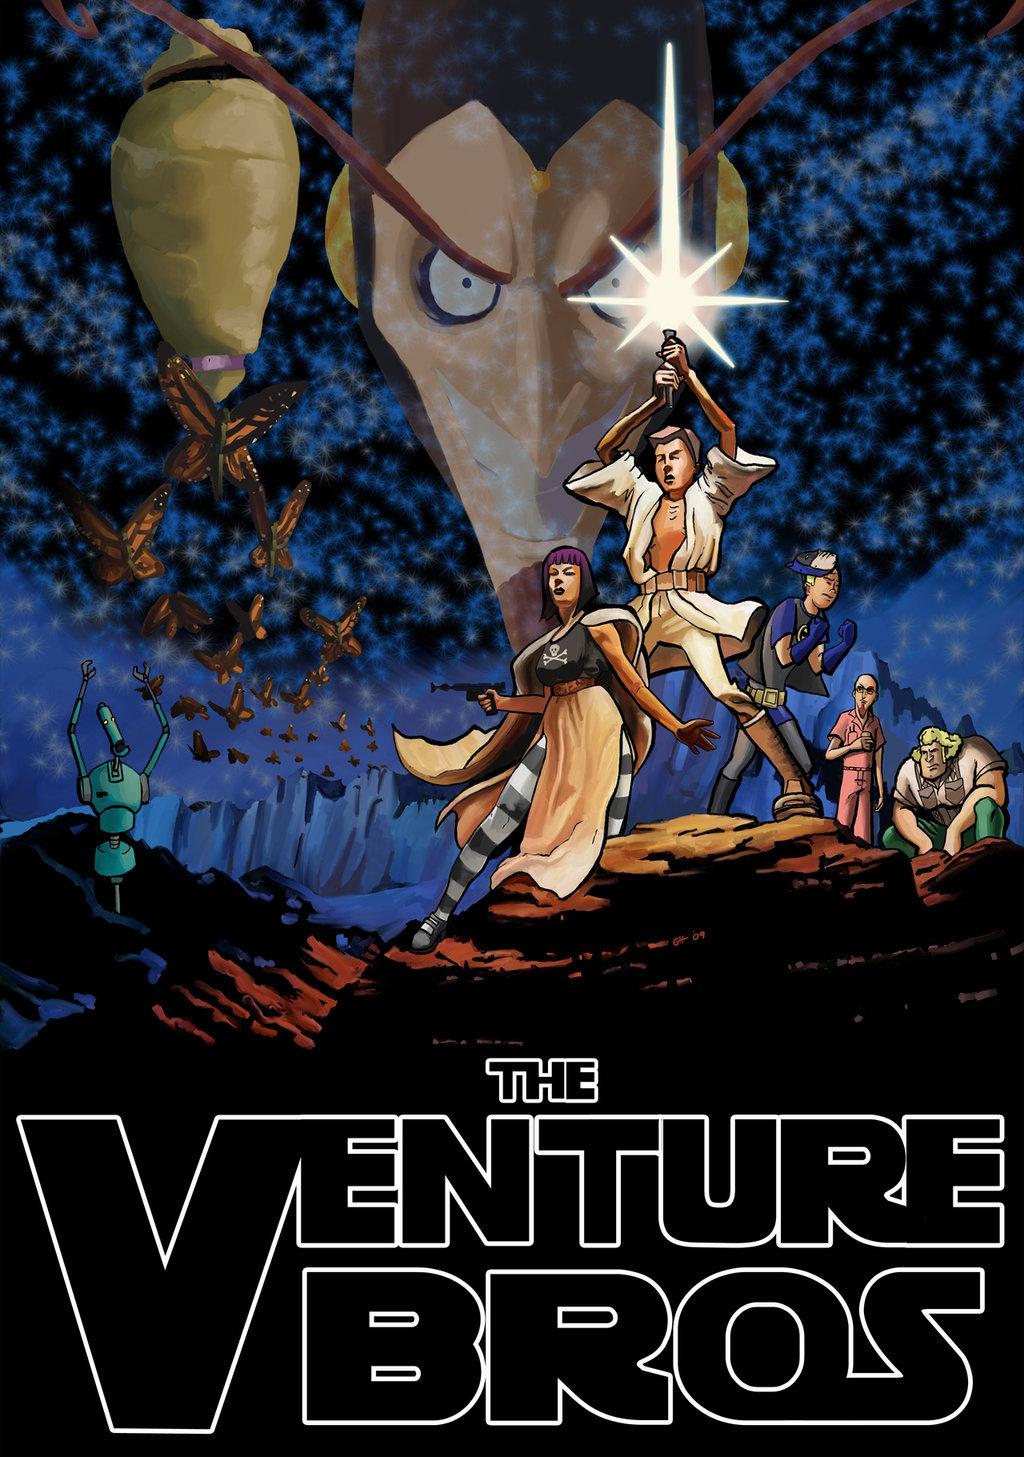 The Venture Bros Wallpaper High Quality